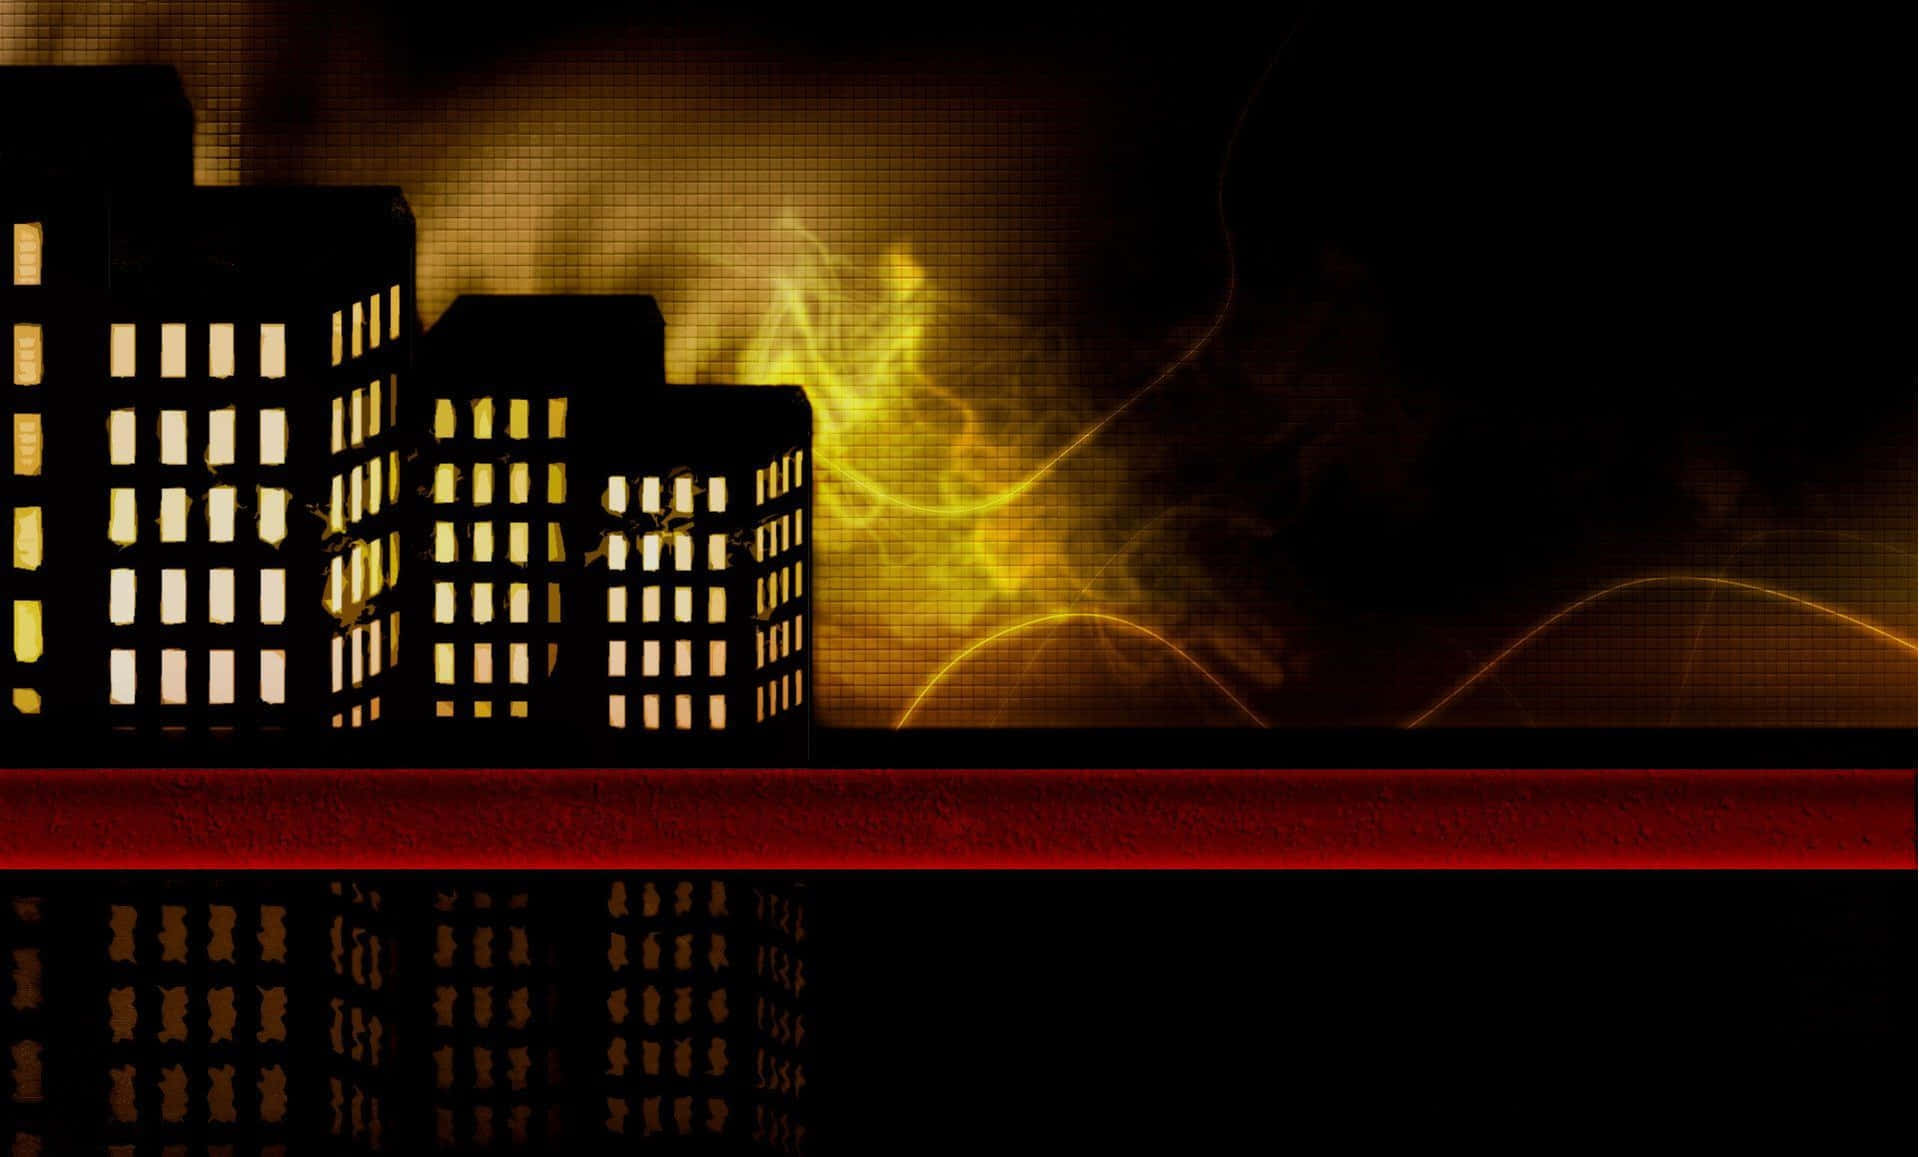 Abstract Fire Cityscape Wallpaper